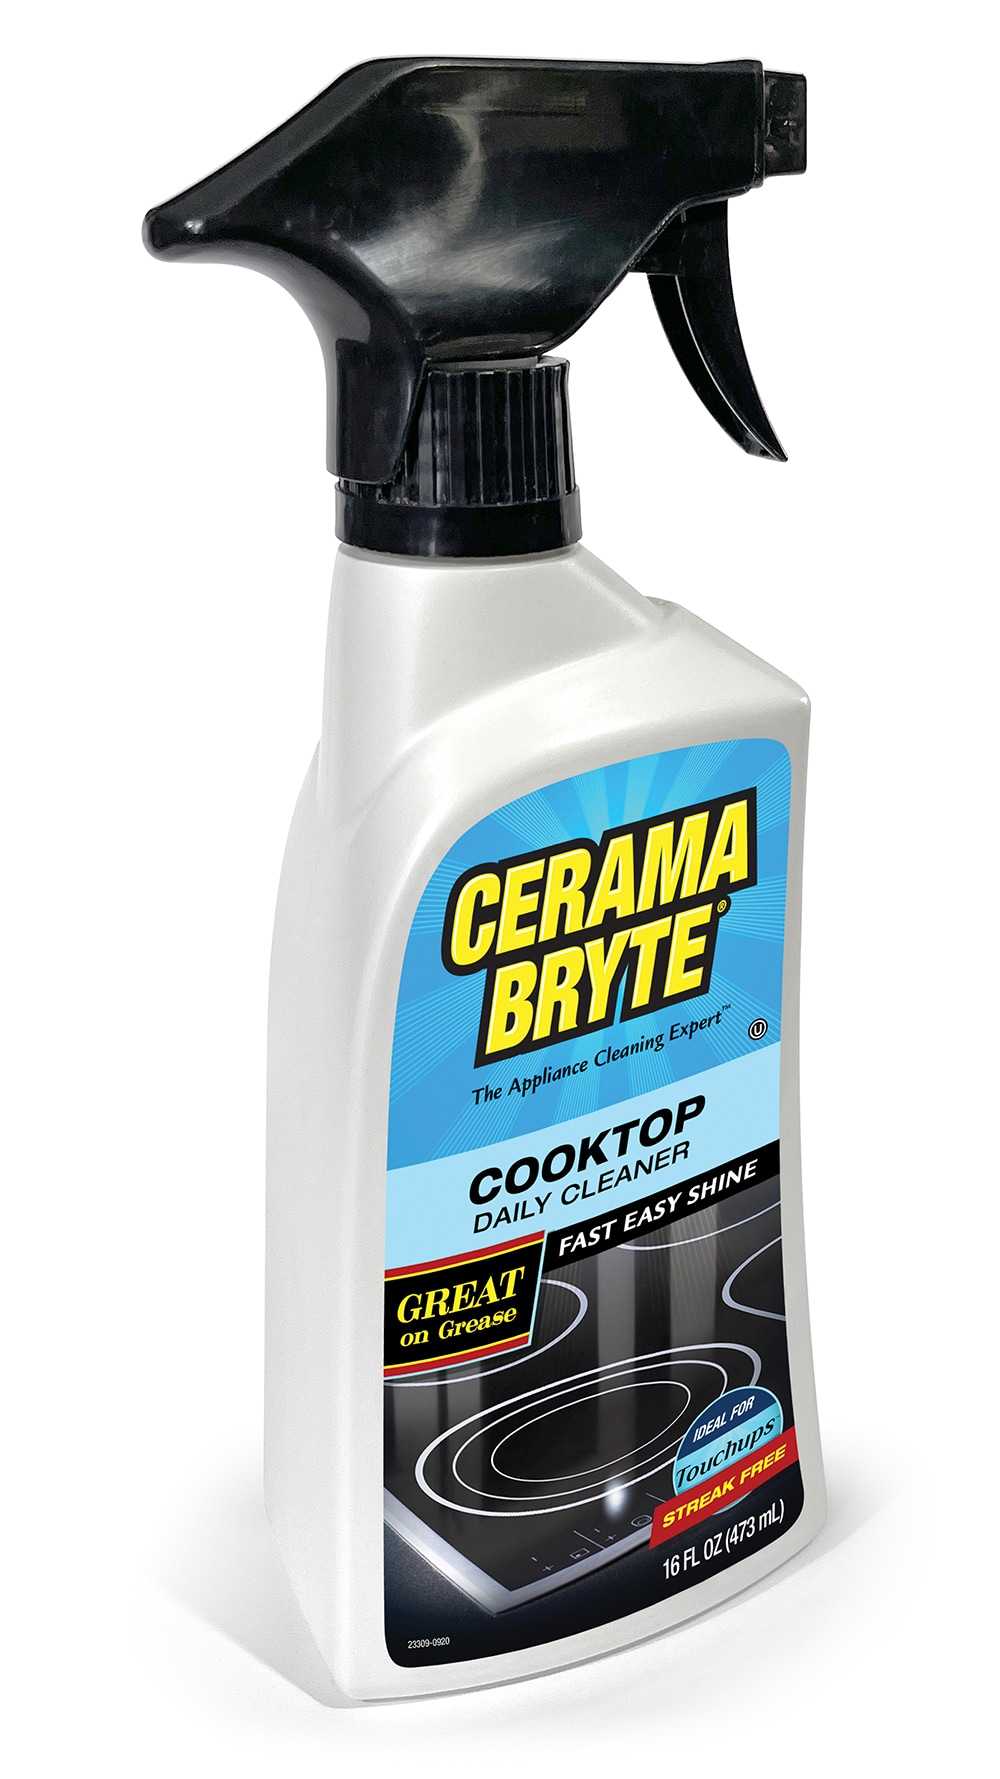 Weiman Ceramic and Glass Cooktop Cleaner - 10/2Ounce - Stove Top Daily  Cleaner 